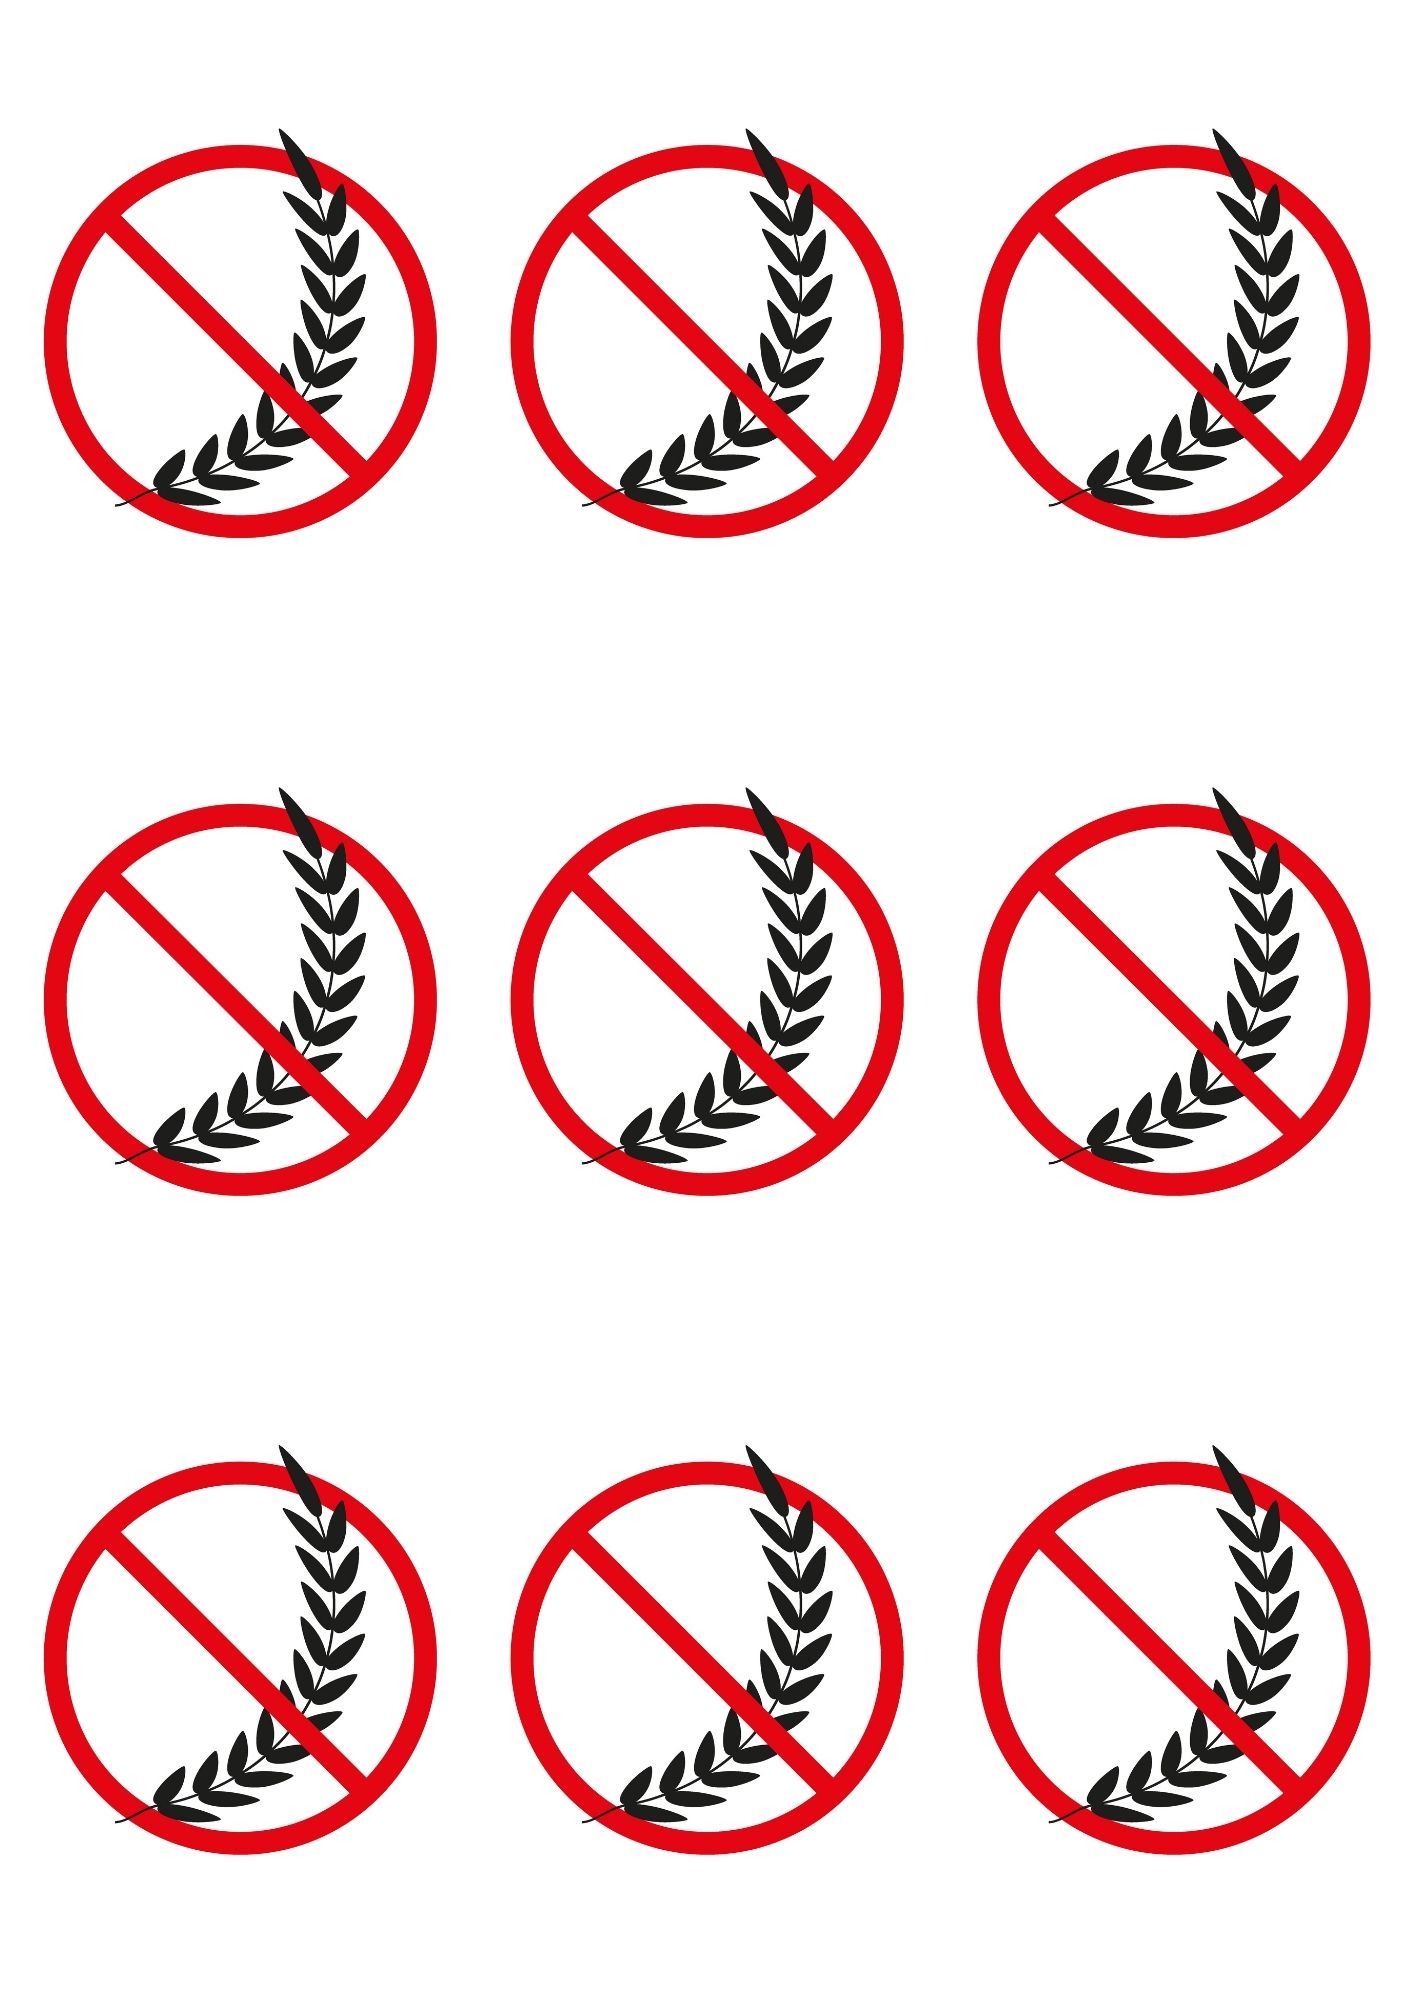 Gluten-Free Signs & Labels (Printable + FREE)